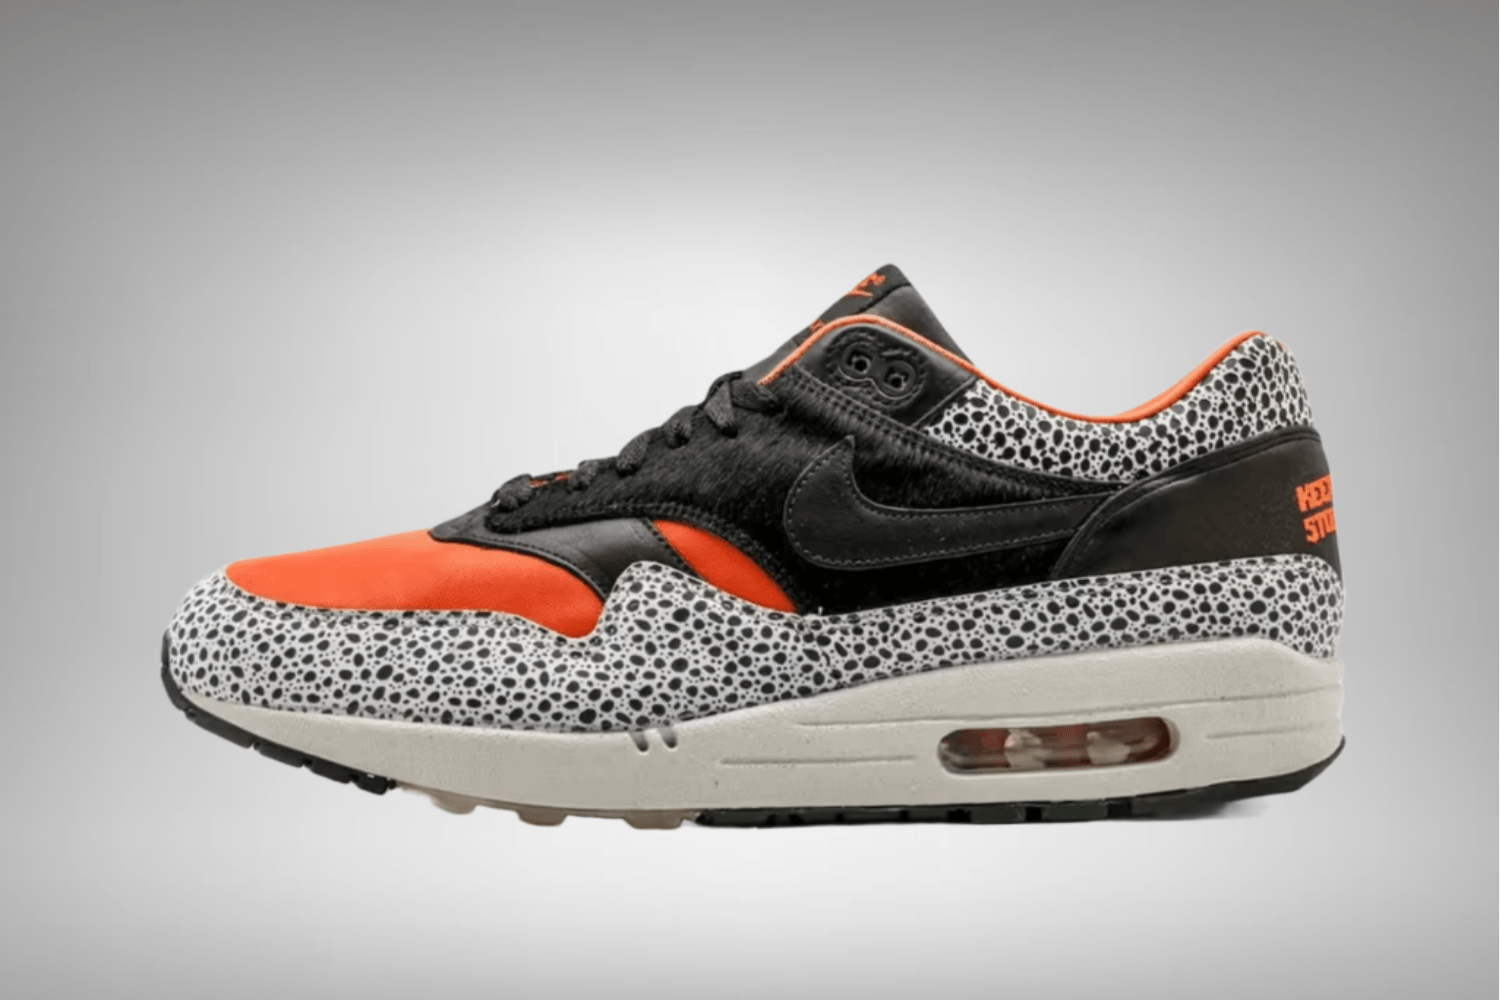 The Nike Air Max 1 'Keep Rippin Stop Slippin' returns in 2023